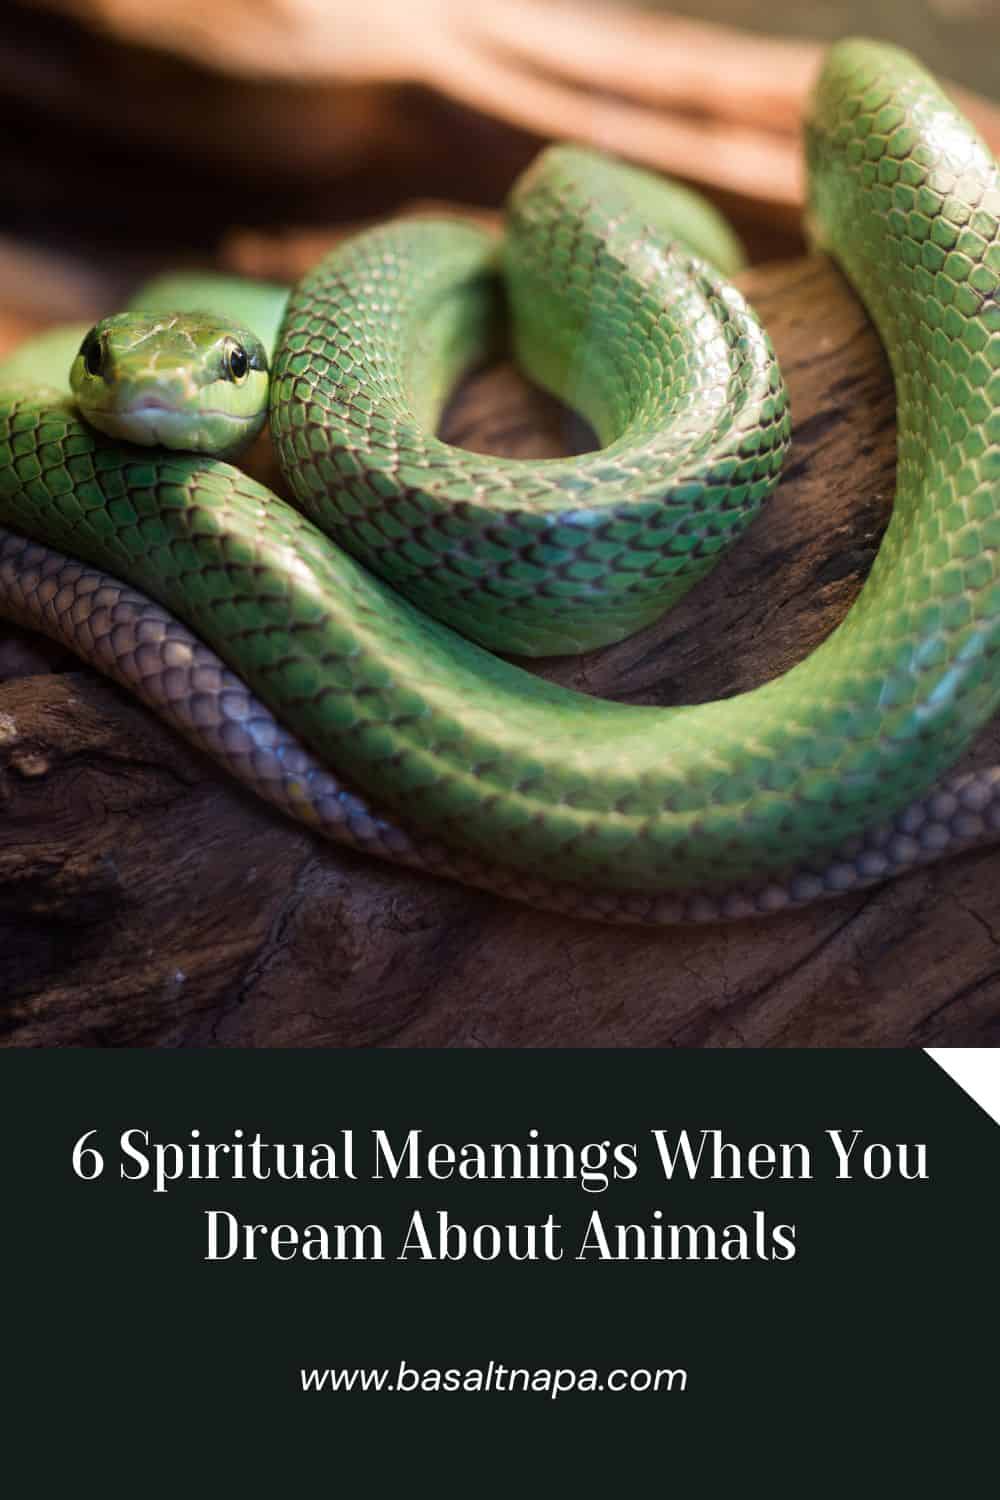 6 Spiritual Meanings When You Dream About Animals